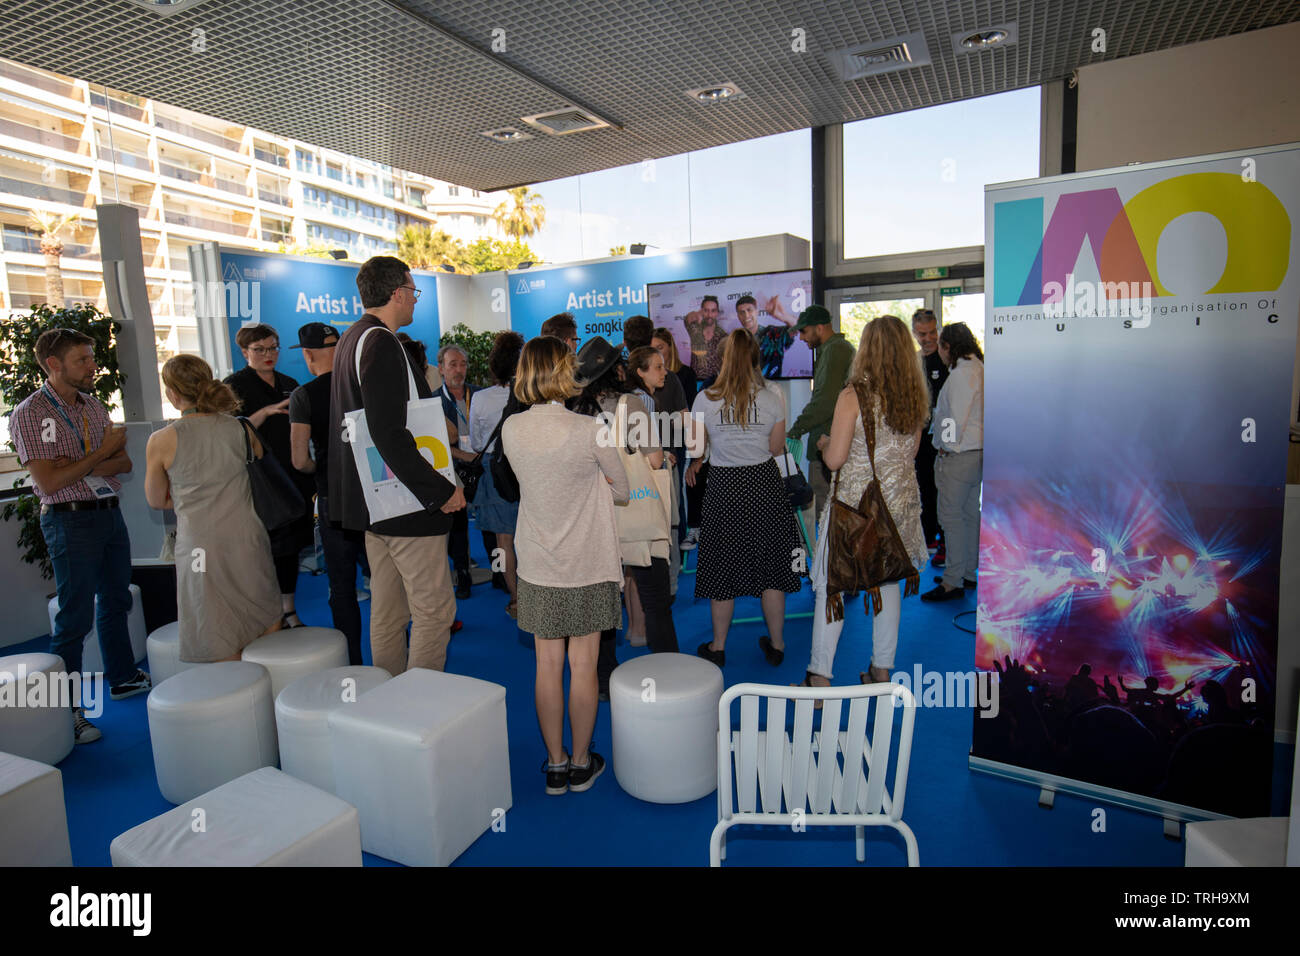 Cannes, France, 5 June 2019 Midem 2019 - Home of the global Music community at the Palais des Festivals in Cannes © ifnm / Alamy Live News Stock Photo